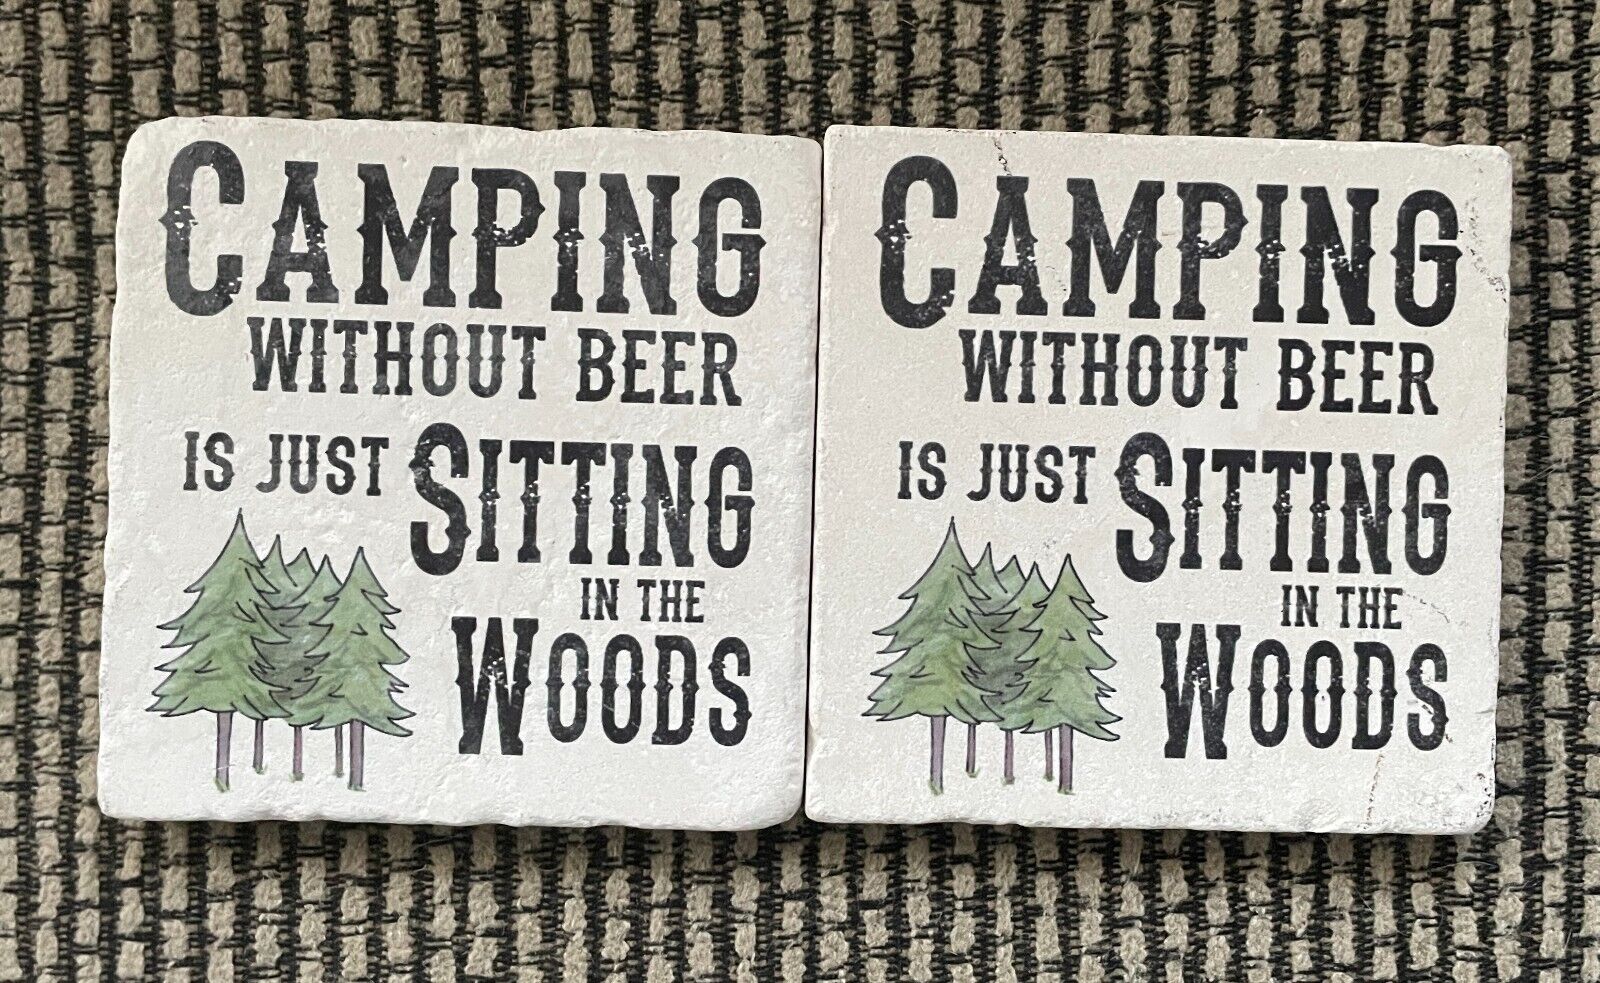 New 2 TIPSY COASTERS Camping w/o Beer is Just Sitting in the Woods, drinks camp